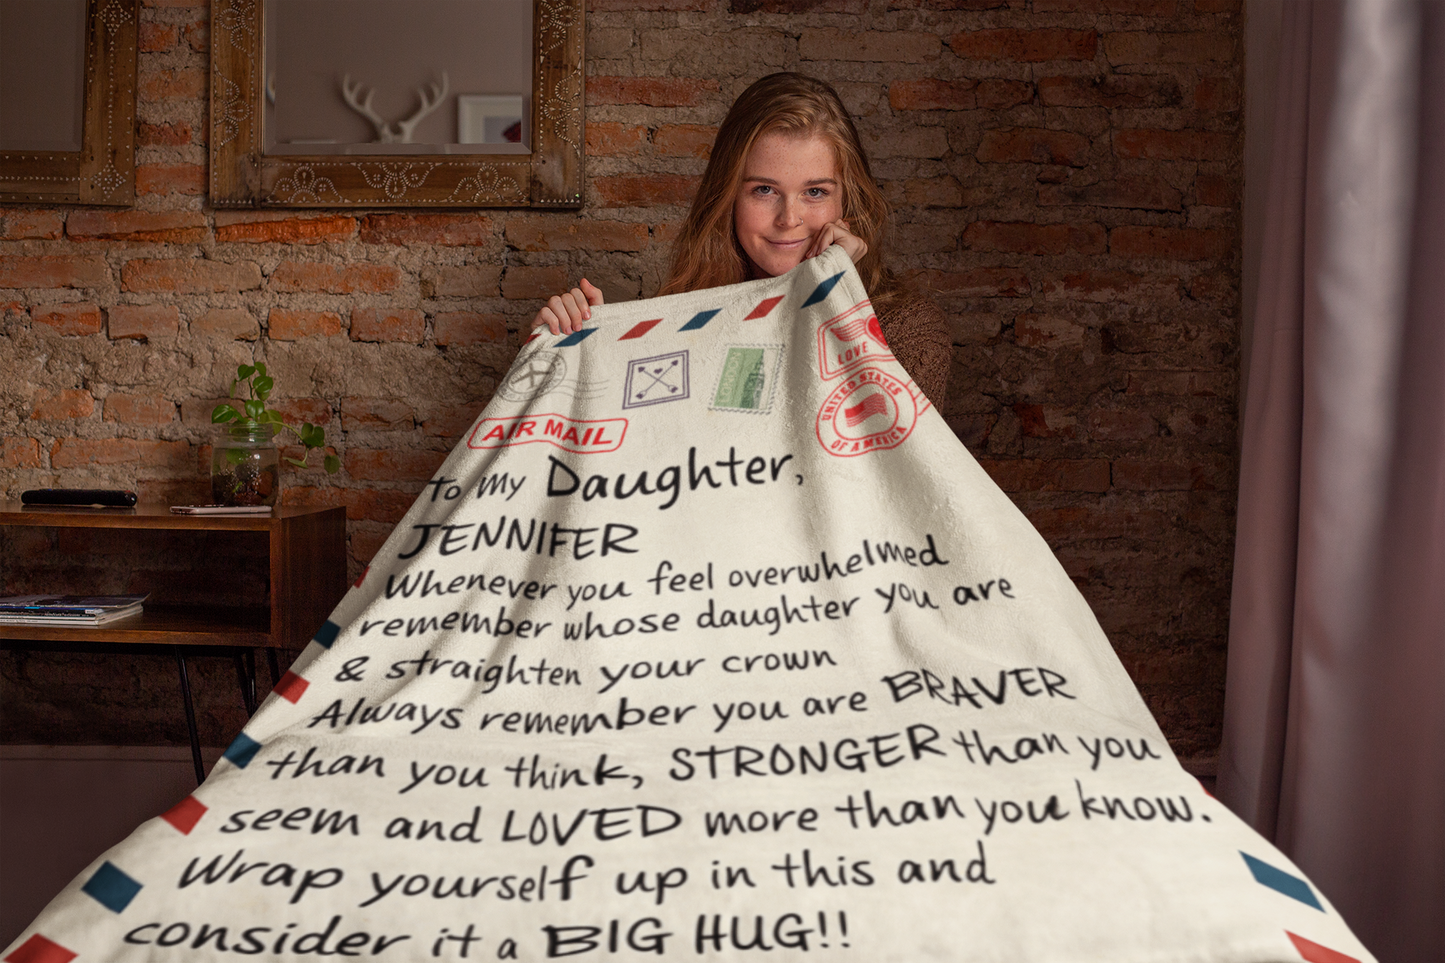 To My Daughter | Personalized Envelope Braver & Stronger Blanket | Throw Blanket 50"x60"